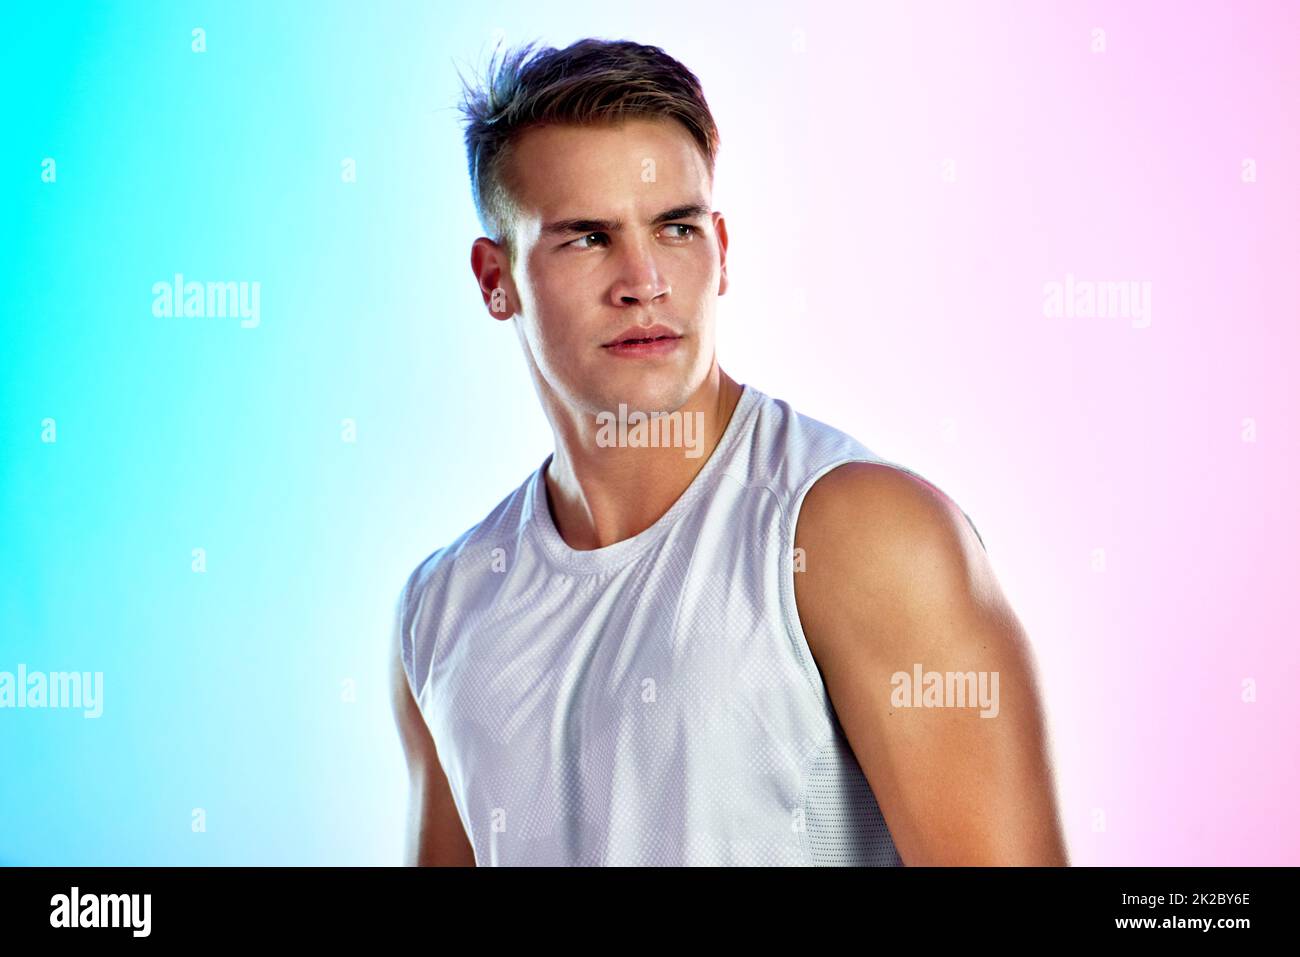 Lets get this workout started. Studio shot of a handsome young male athlete posing against a multi-coloured background. Stock Photo